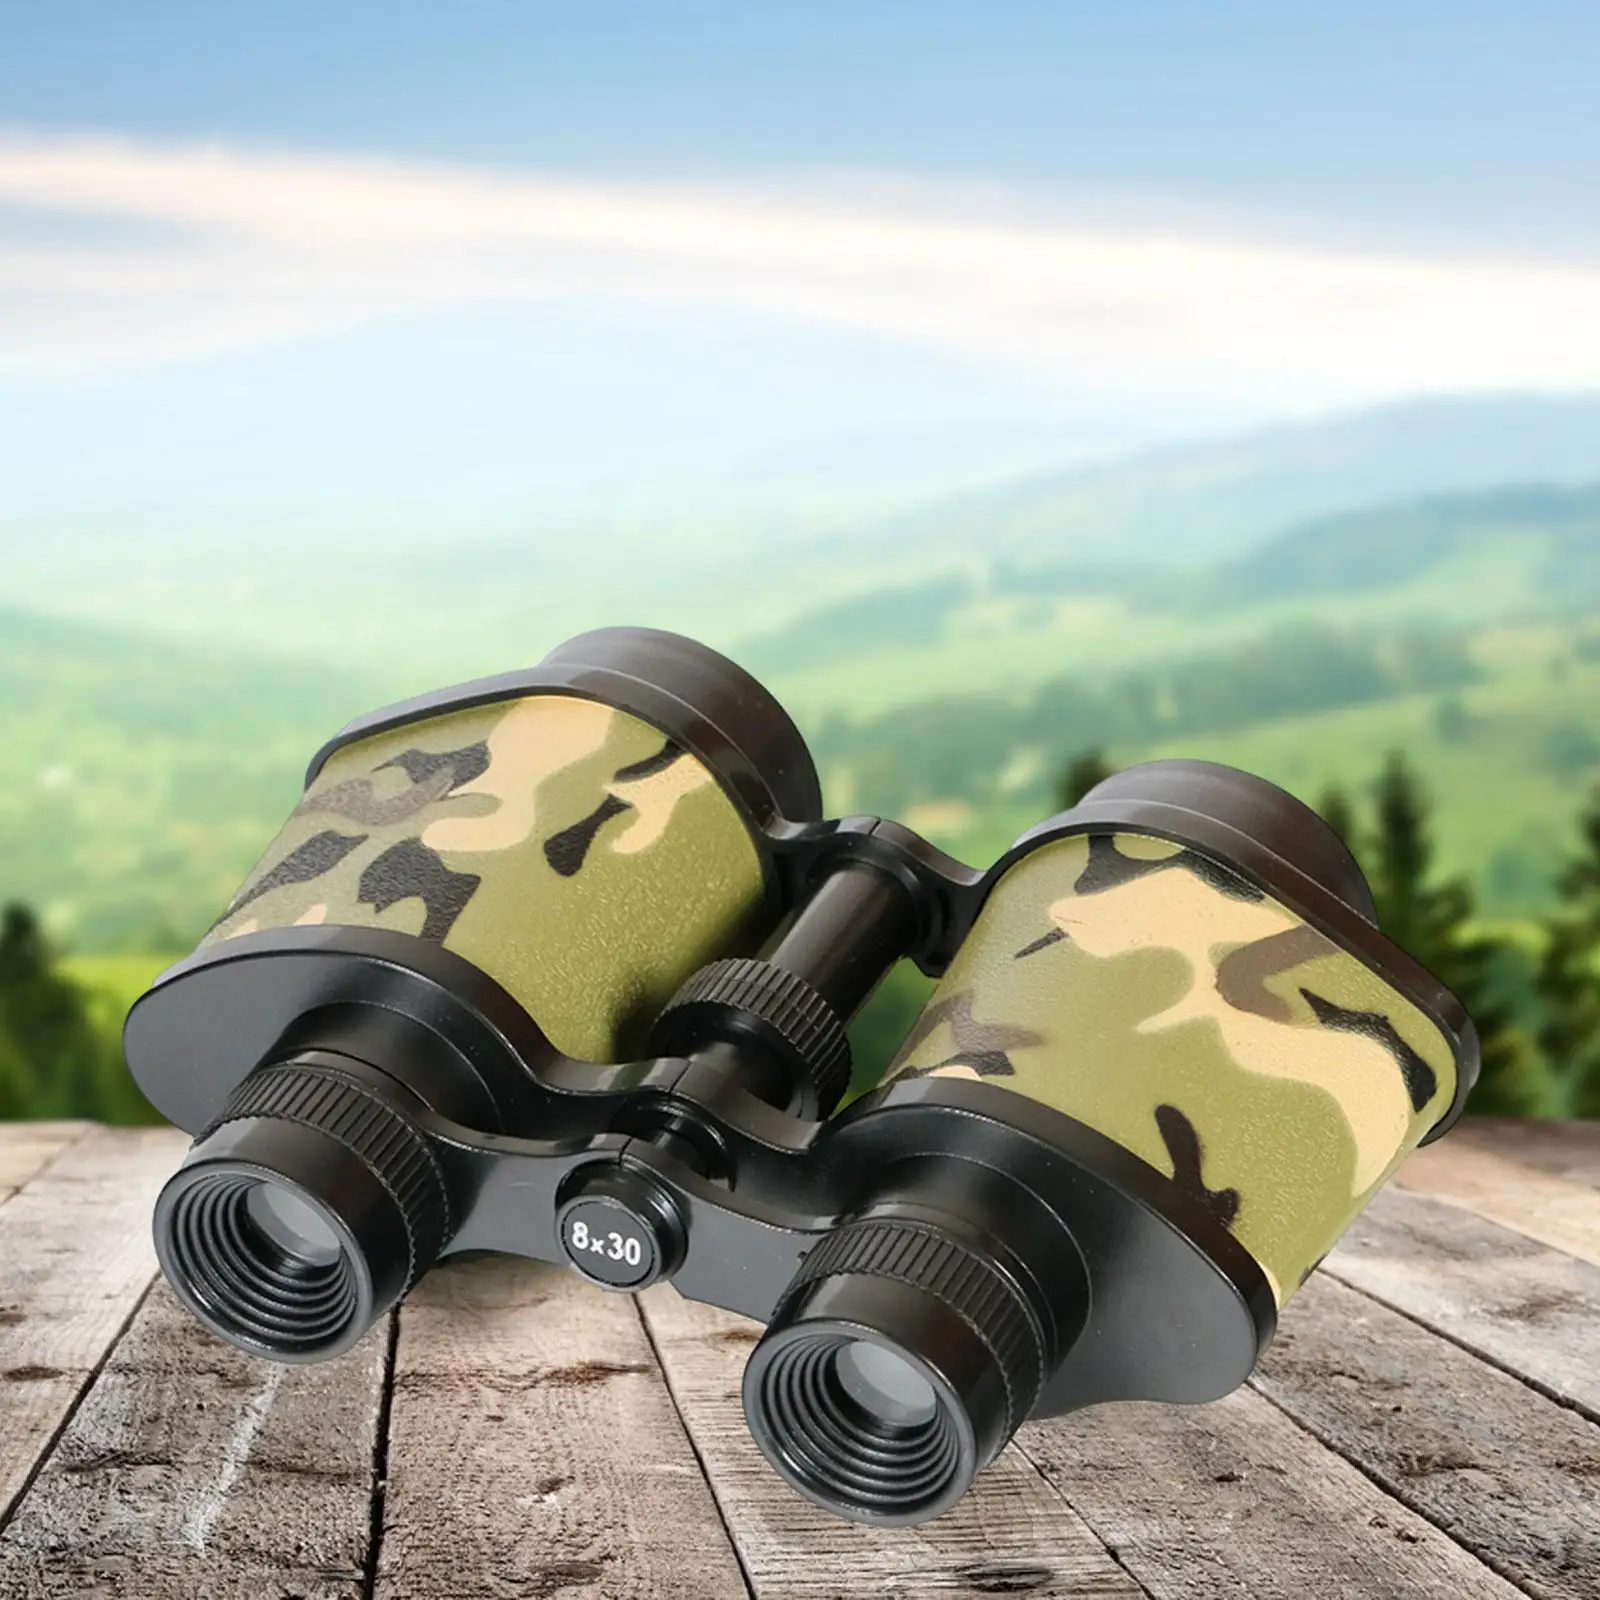 Kids Binoculars Toy 8x30 Professional with Neck Lanyard Jungle Binoculars Toy for Camping Hunting Sports Presents Exploration